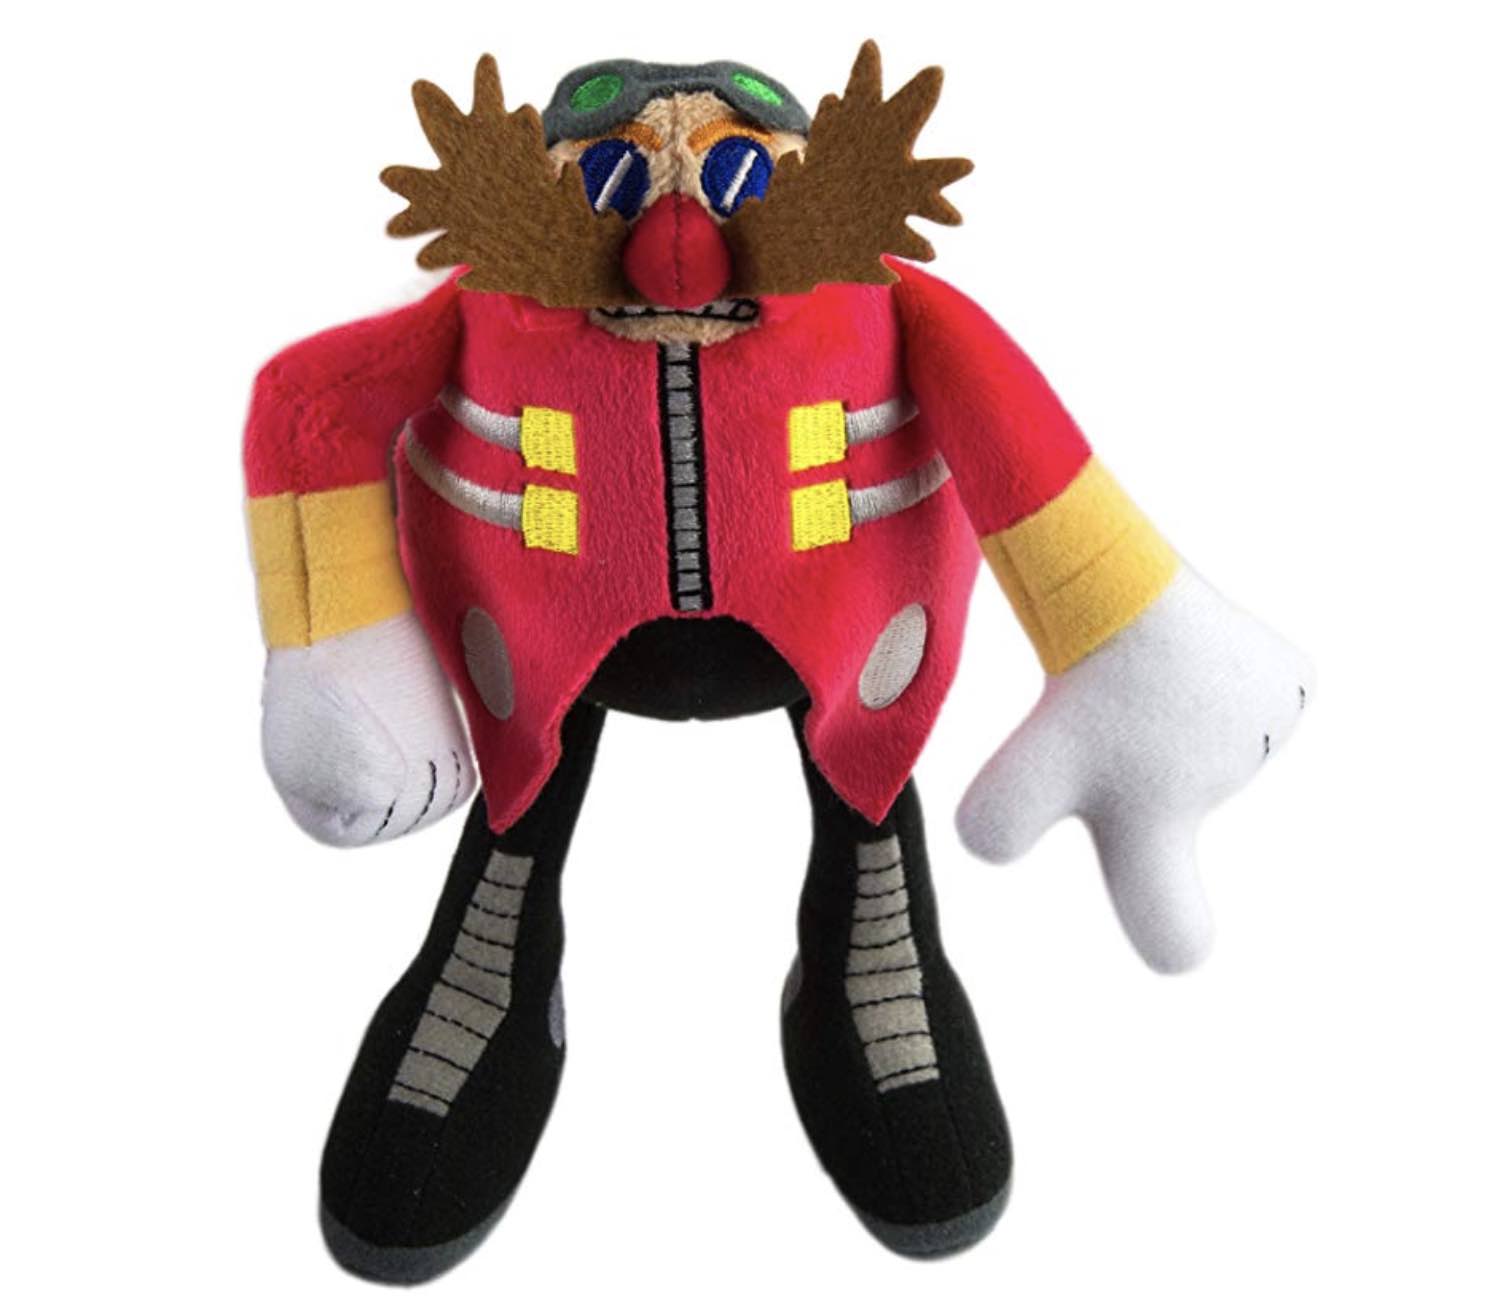 Plush Archives - The Best Sonic the Hedgehog Products